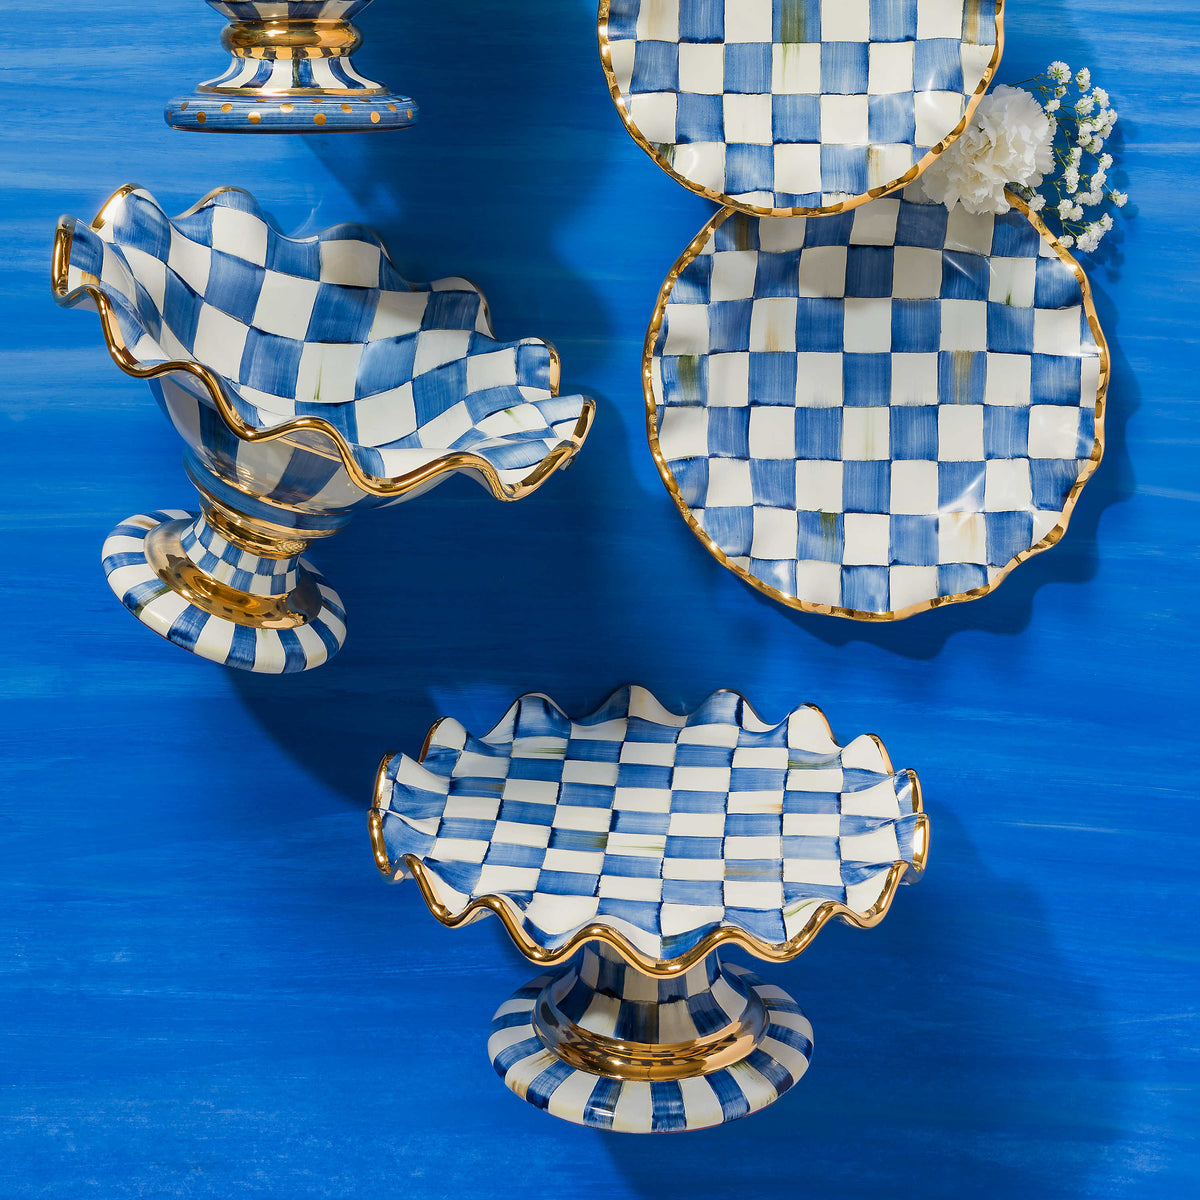 Royal Check Fluted Cake Stand